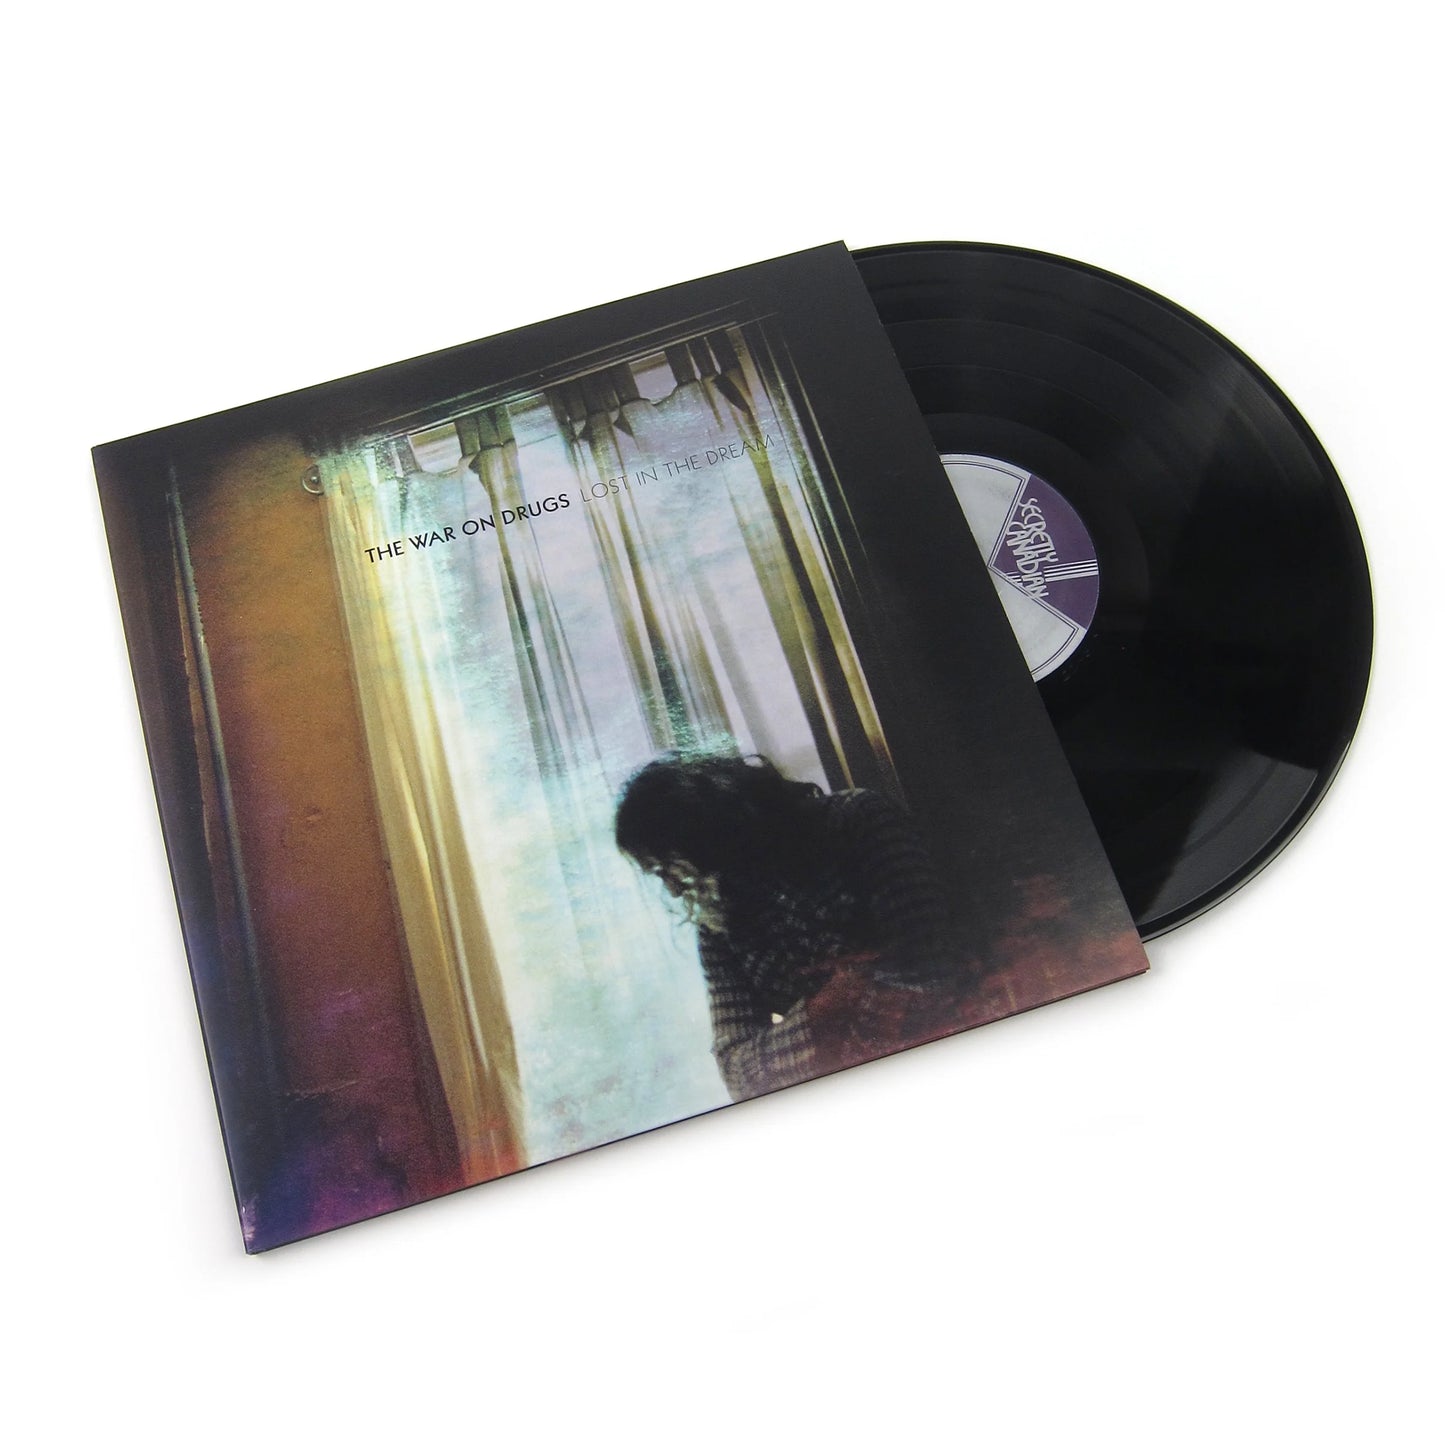 The War On Drugs - Lost In The Dream (Double Black Vinyl)